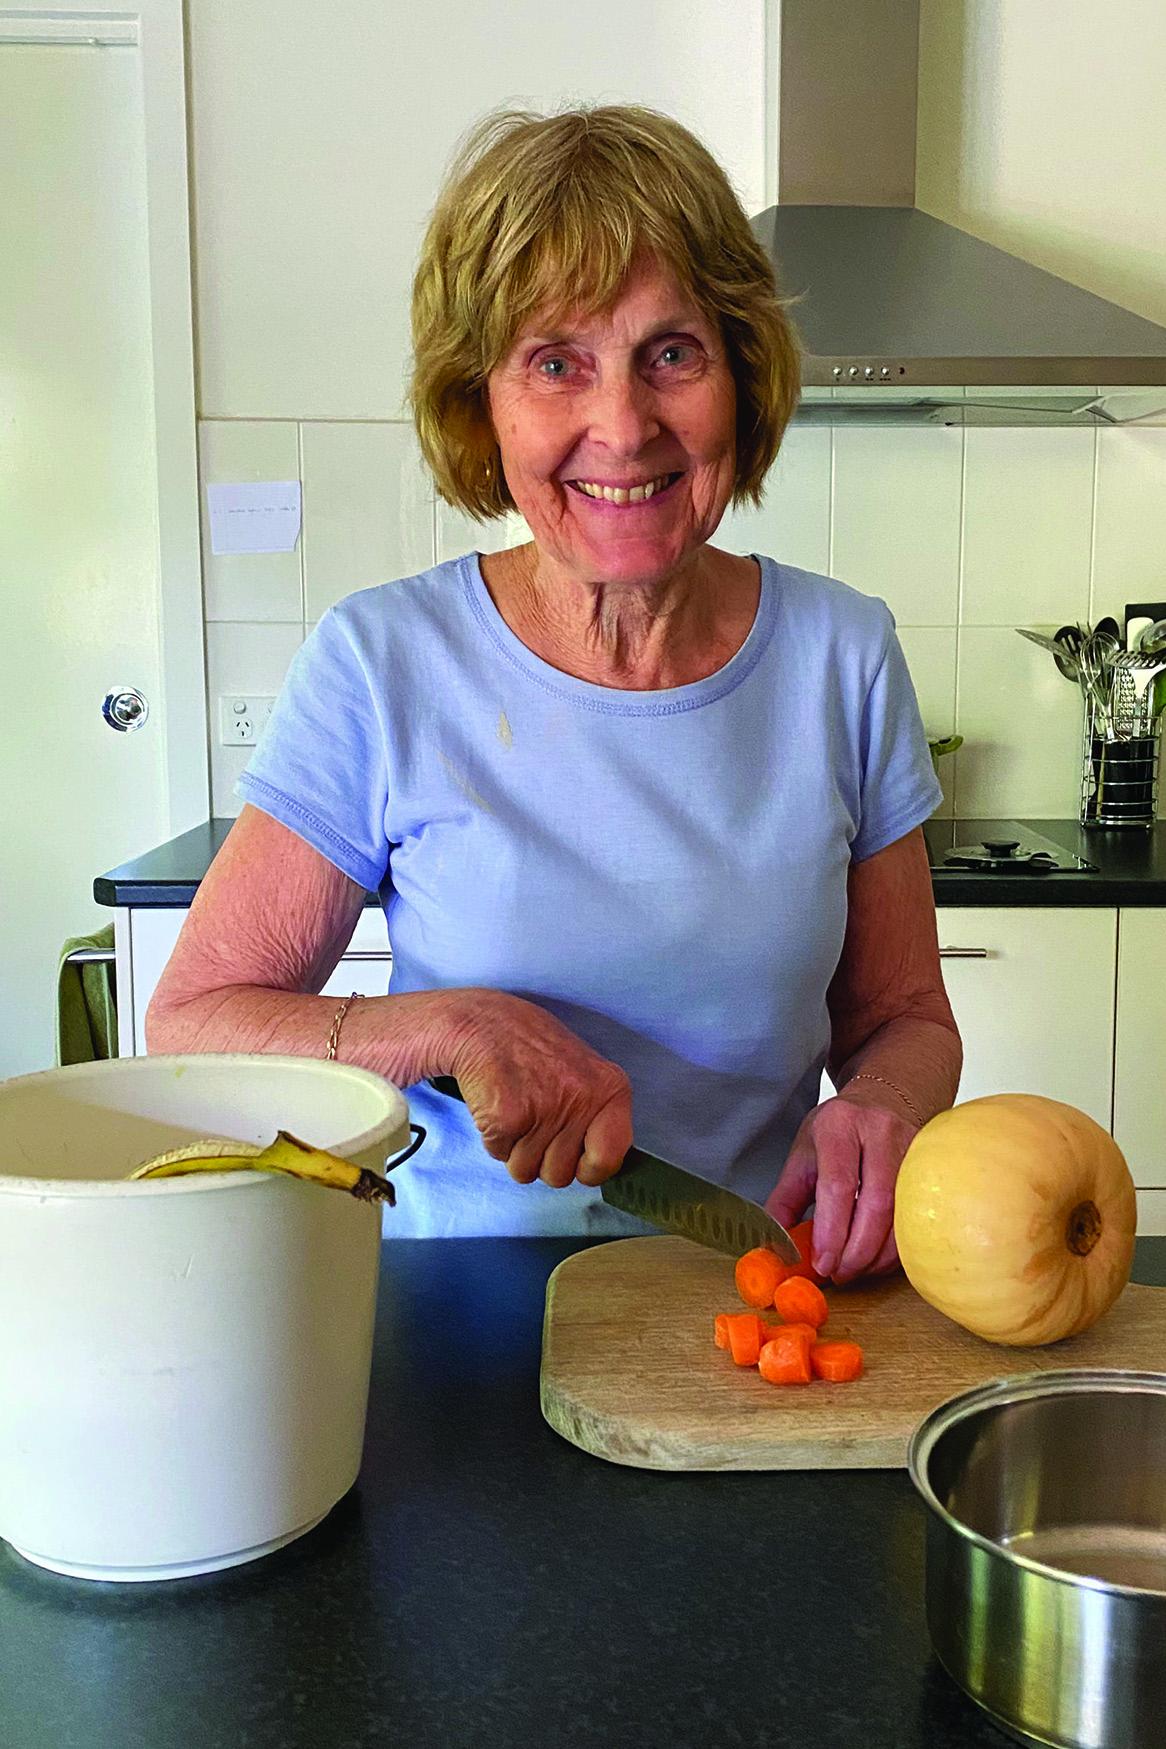 An older woman wearing a blue tshirt stands smiling at a kitchen bench while chopping vegetables. A light brown FOGO caddy is on the bench.